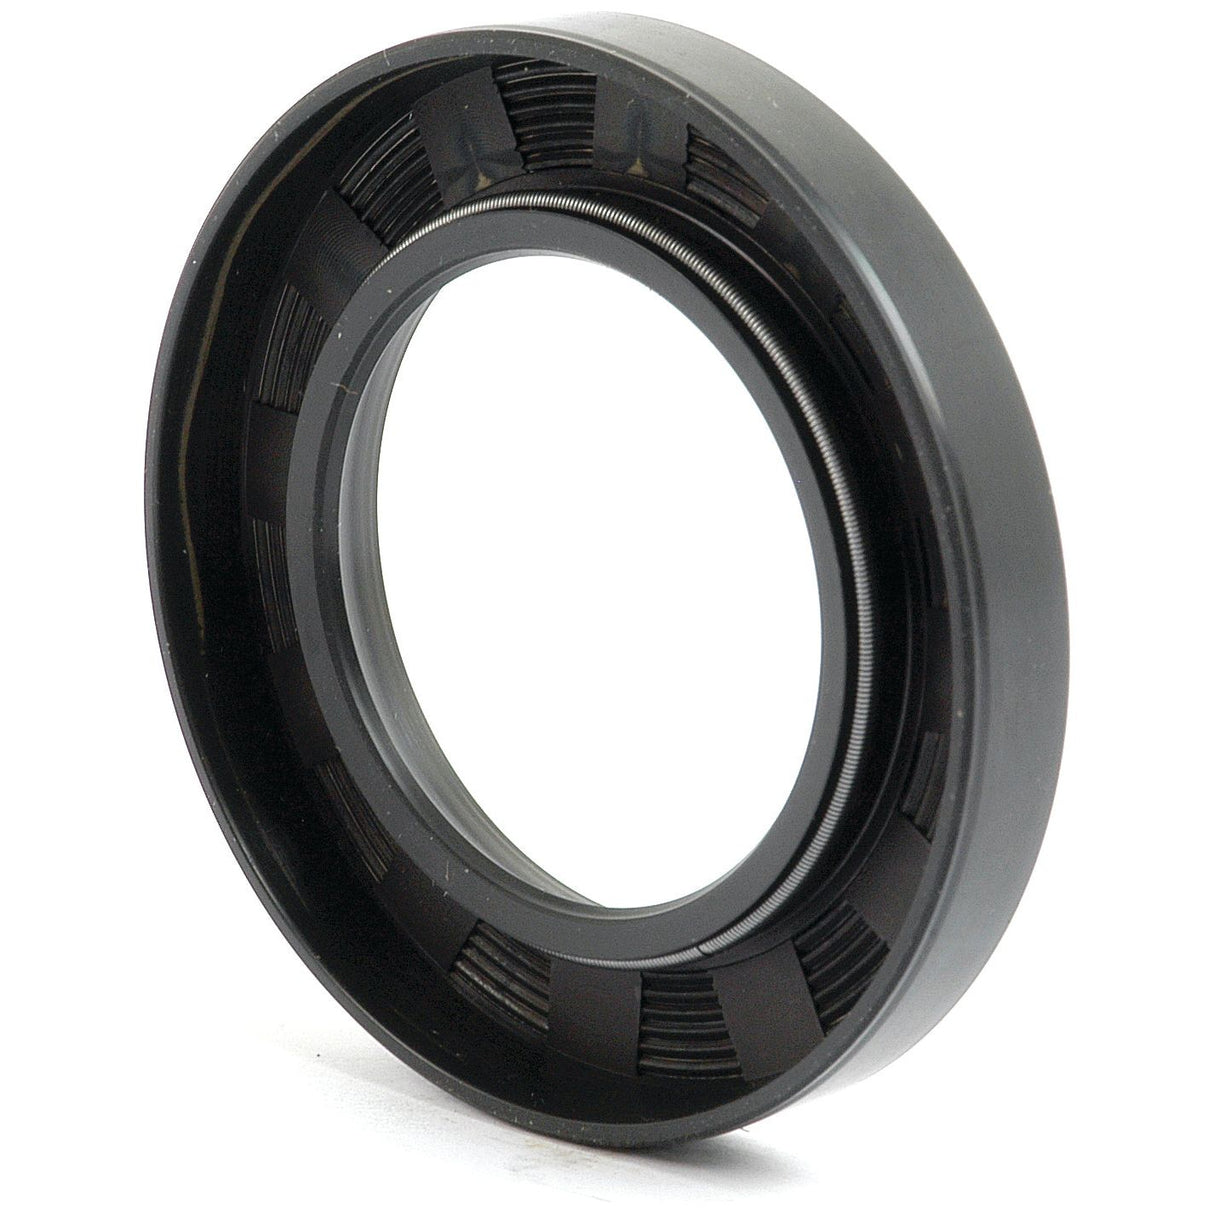 Imperial Rotary Shaft Seal, 2 1/8" x 3 1/2" x 1/2" Single Lip - S.65707 - Massey Tractor Parts